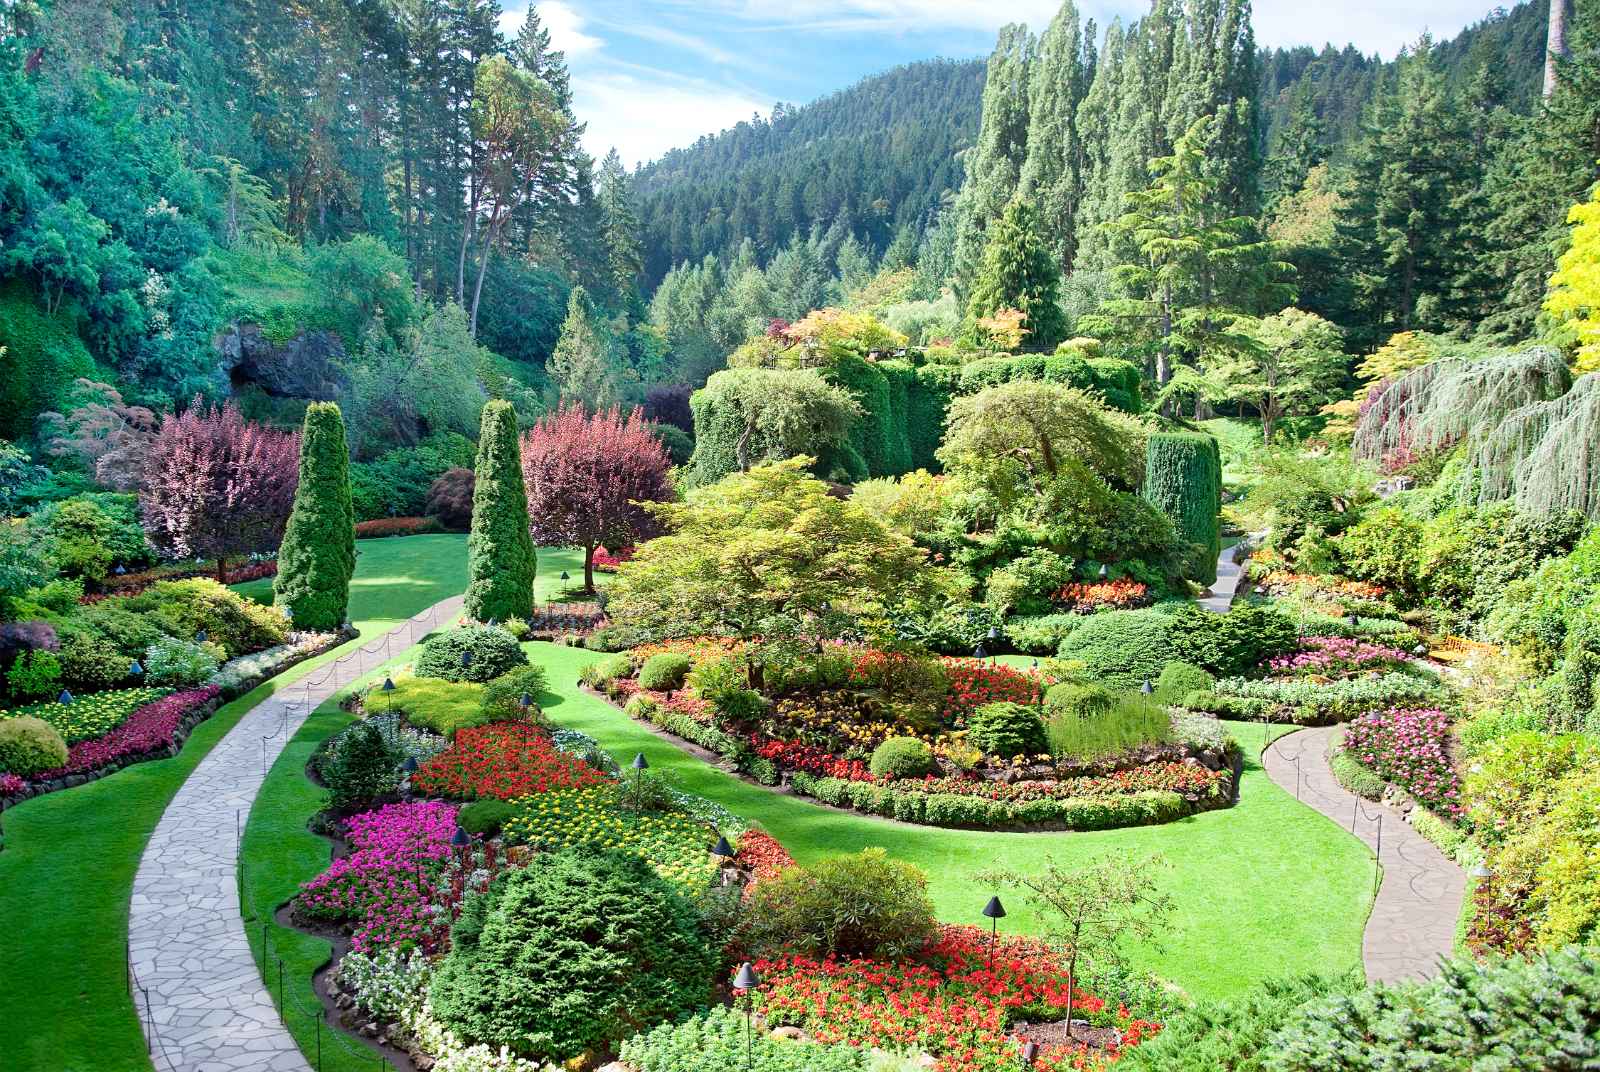 Things to do in Victoria BC Butchart Gardens